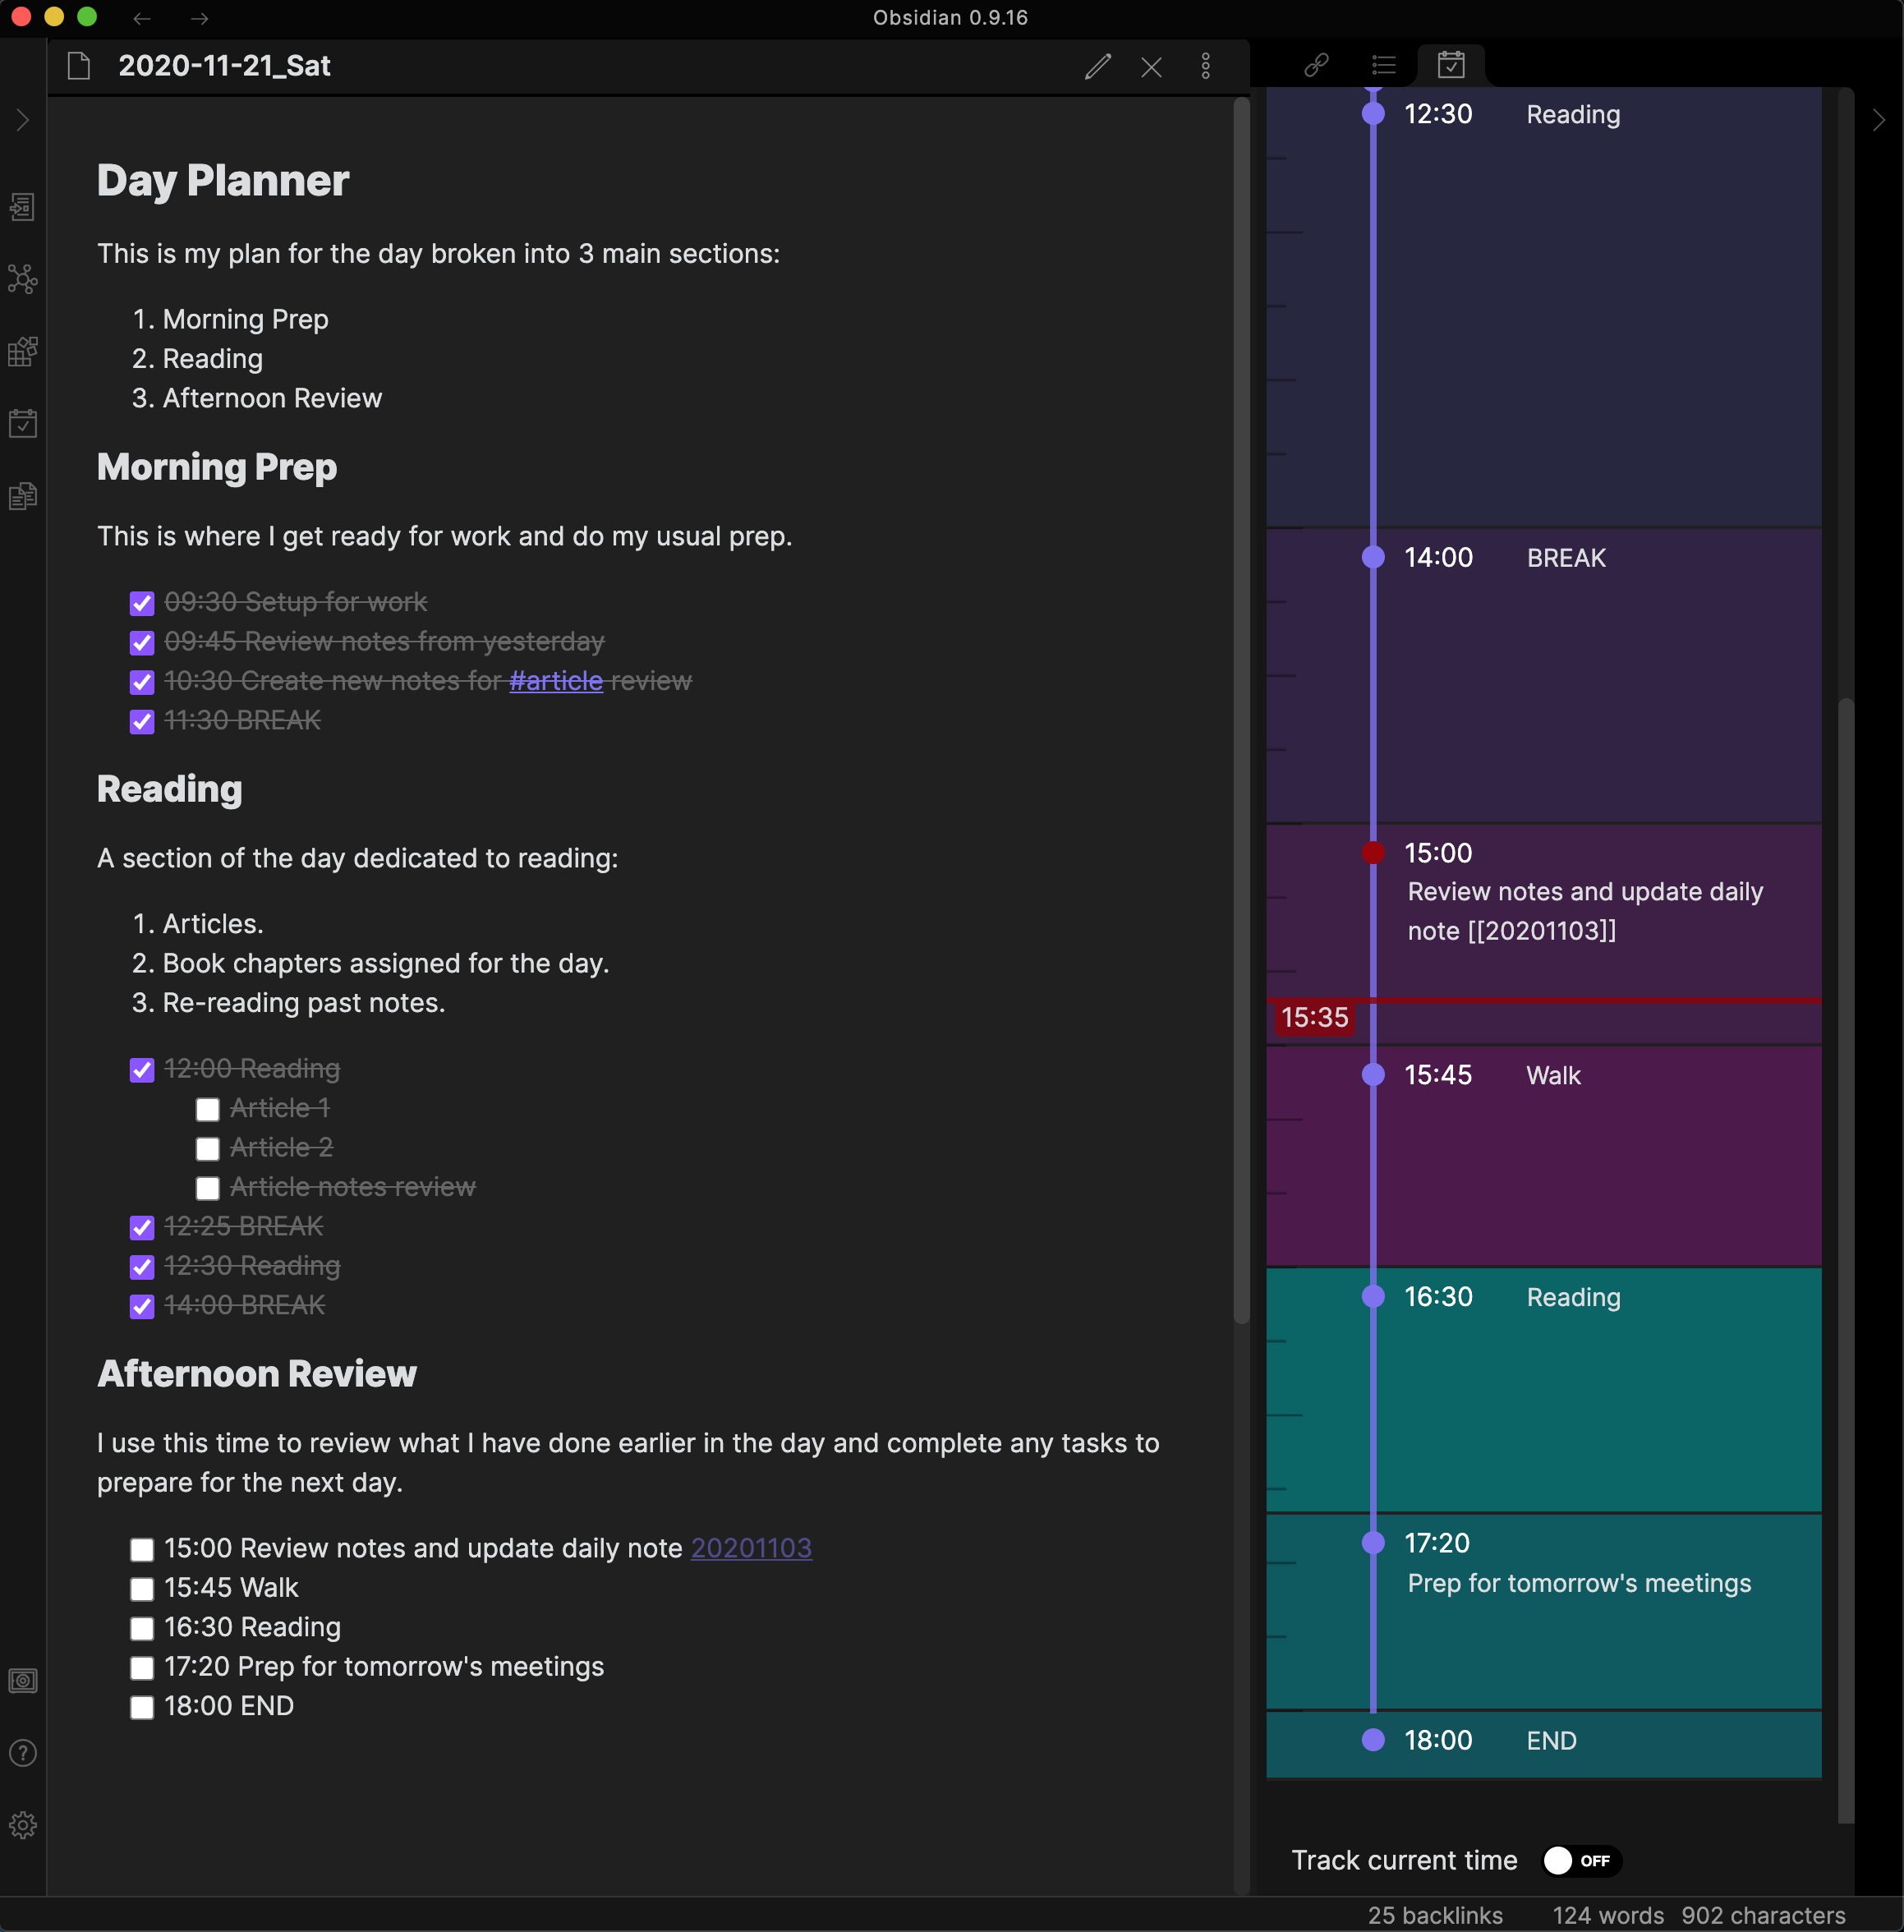 Day Planner Demo Image